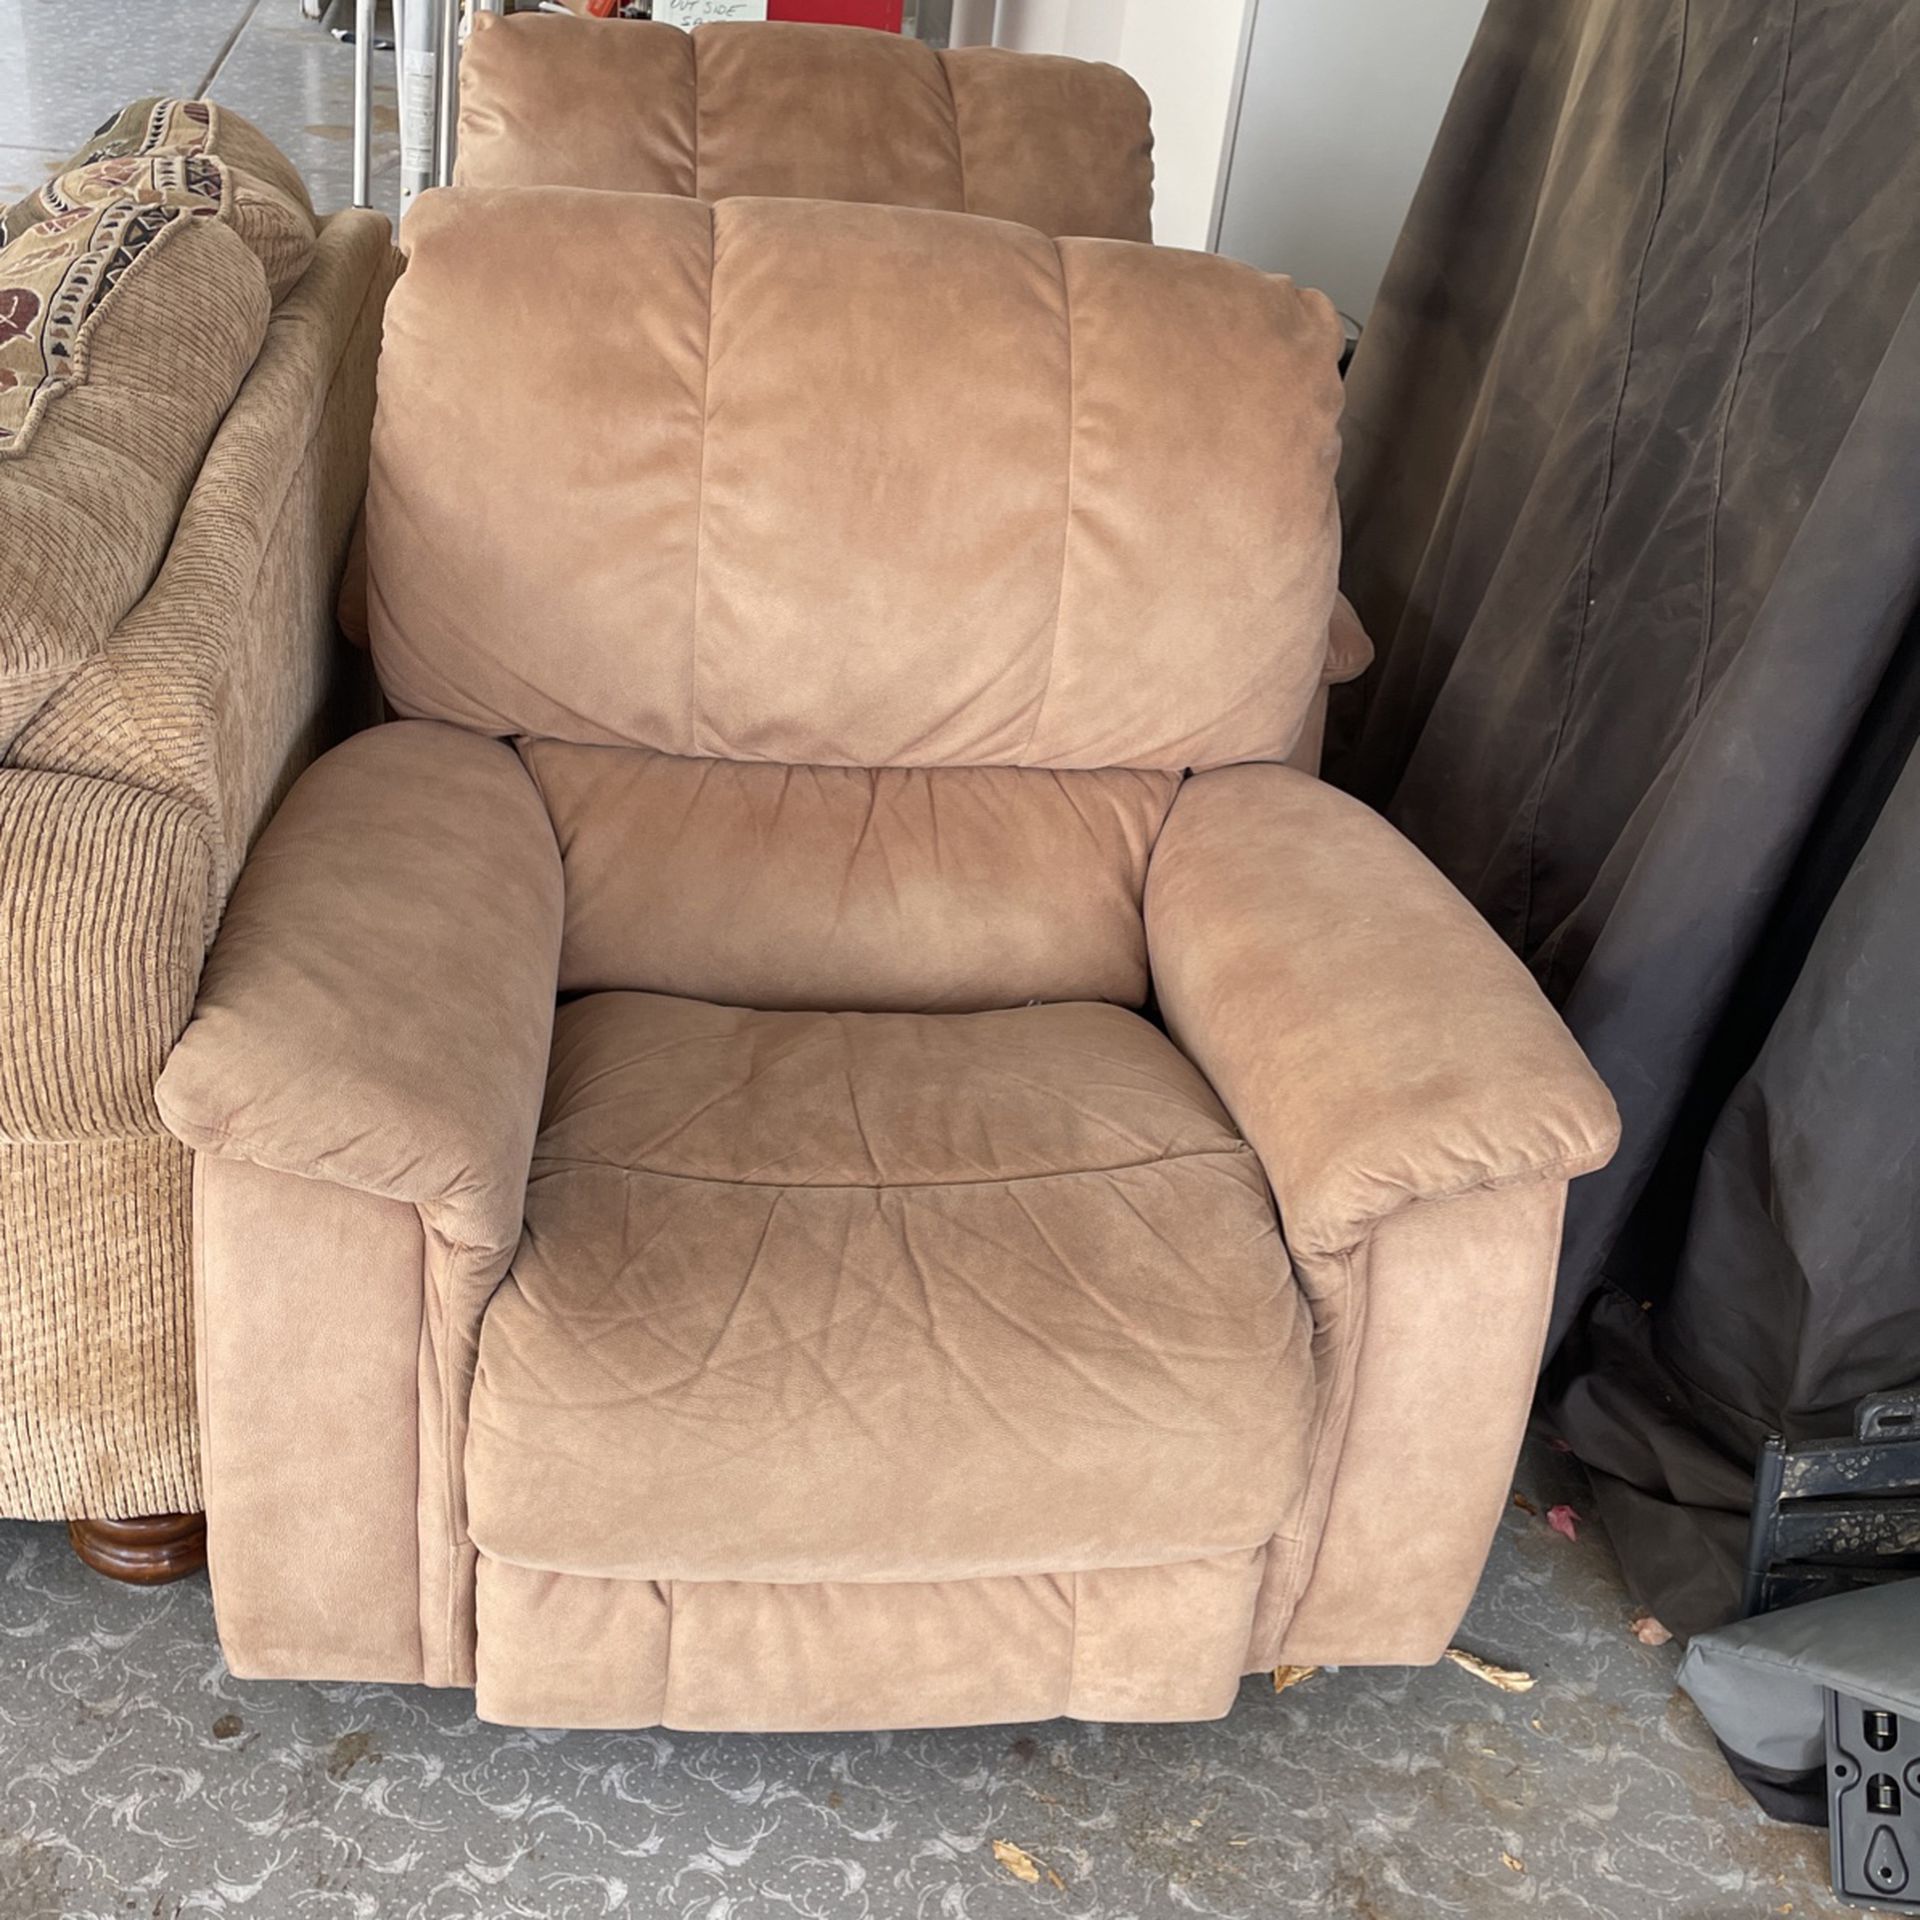 2 Gently Used Recliners 